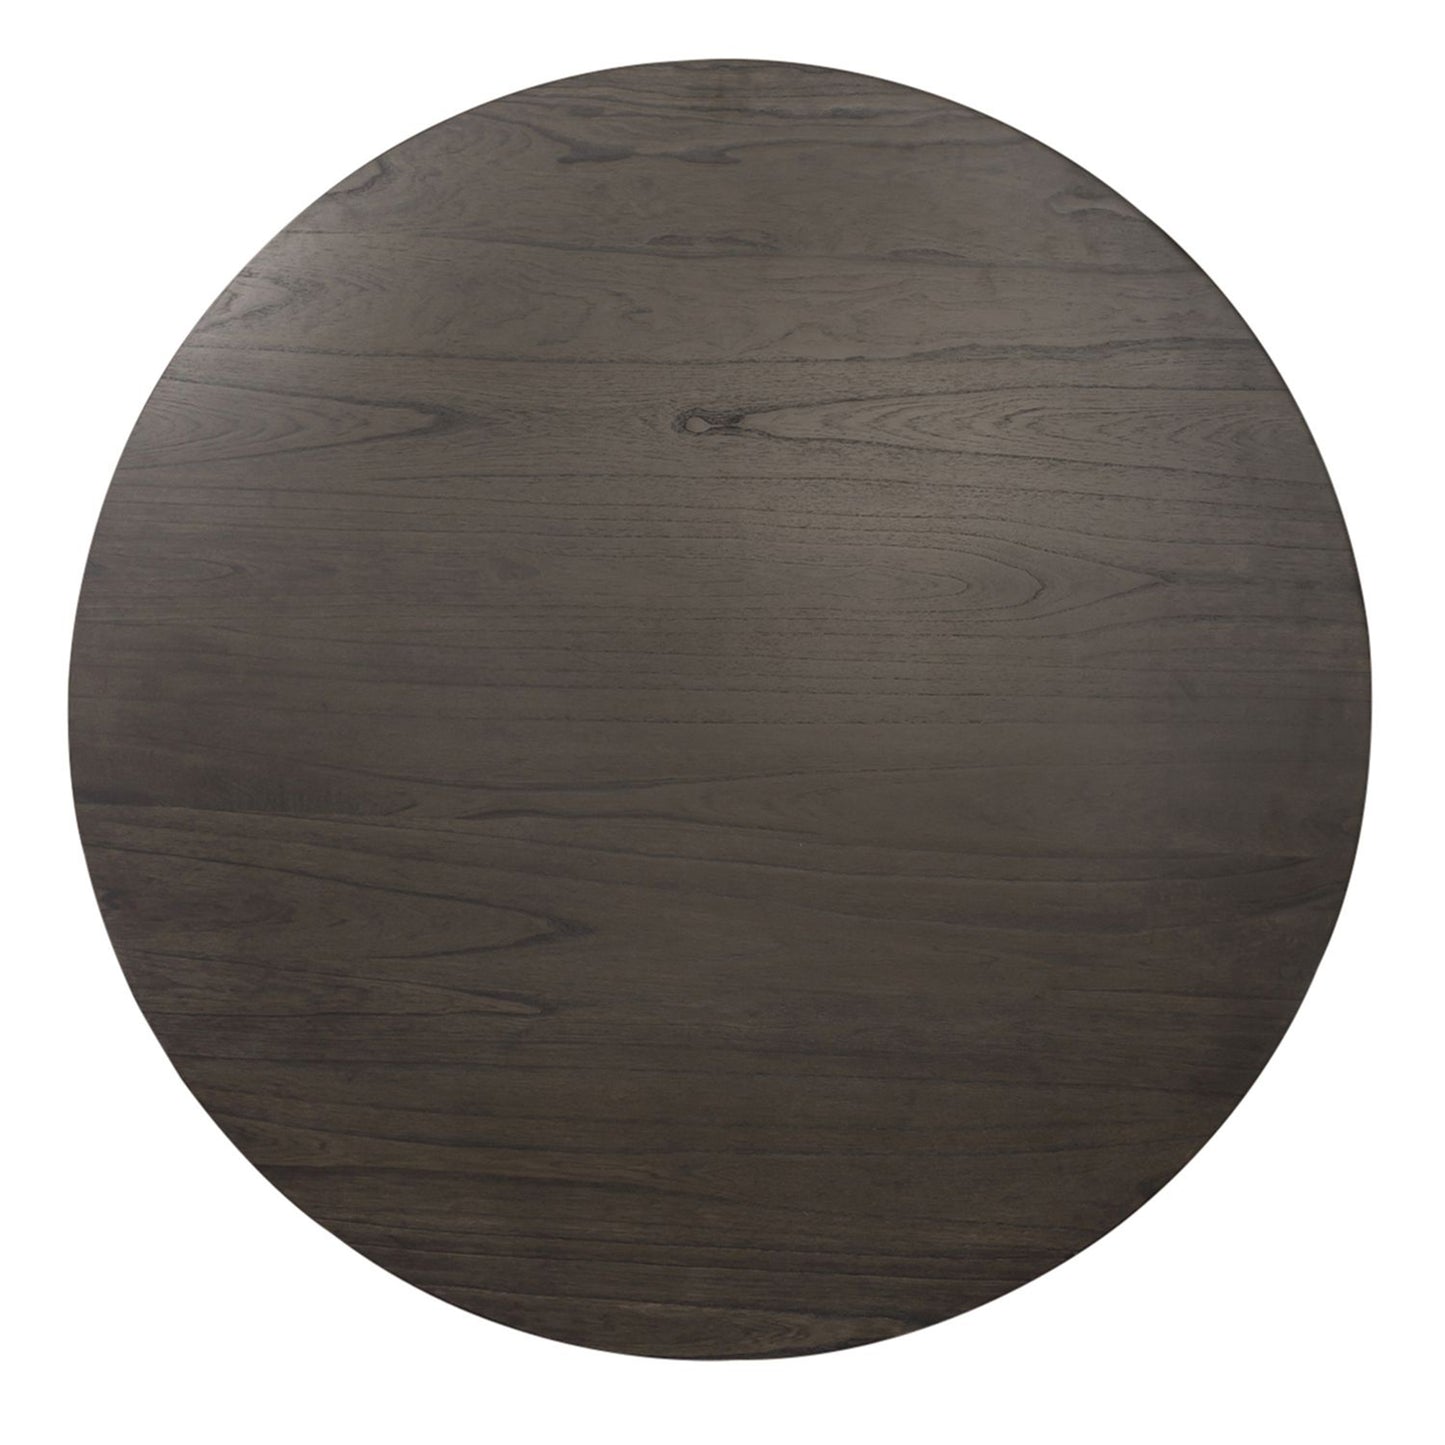 Almeta Dining Set - Crisscross X Base Round Table with 4 Chairs in Dark Umber Brown Finish